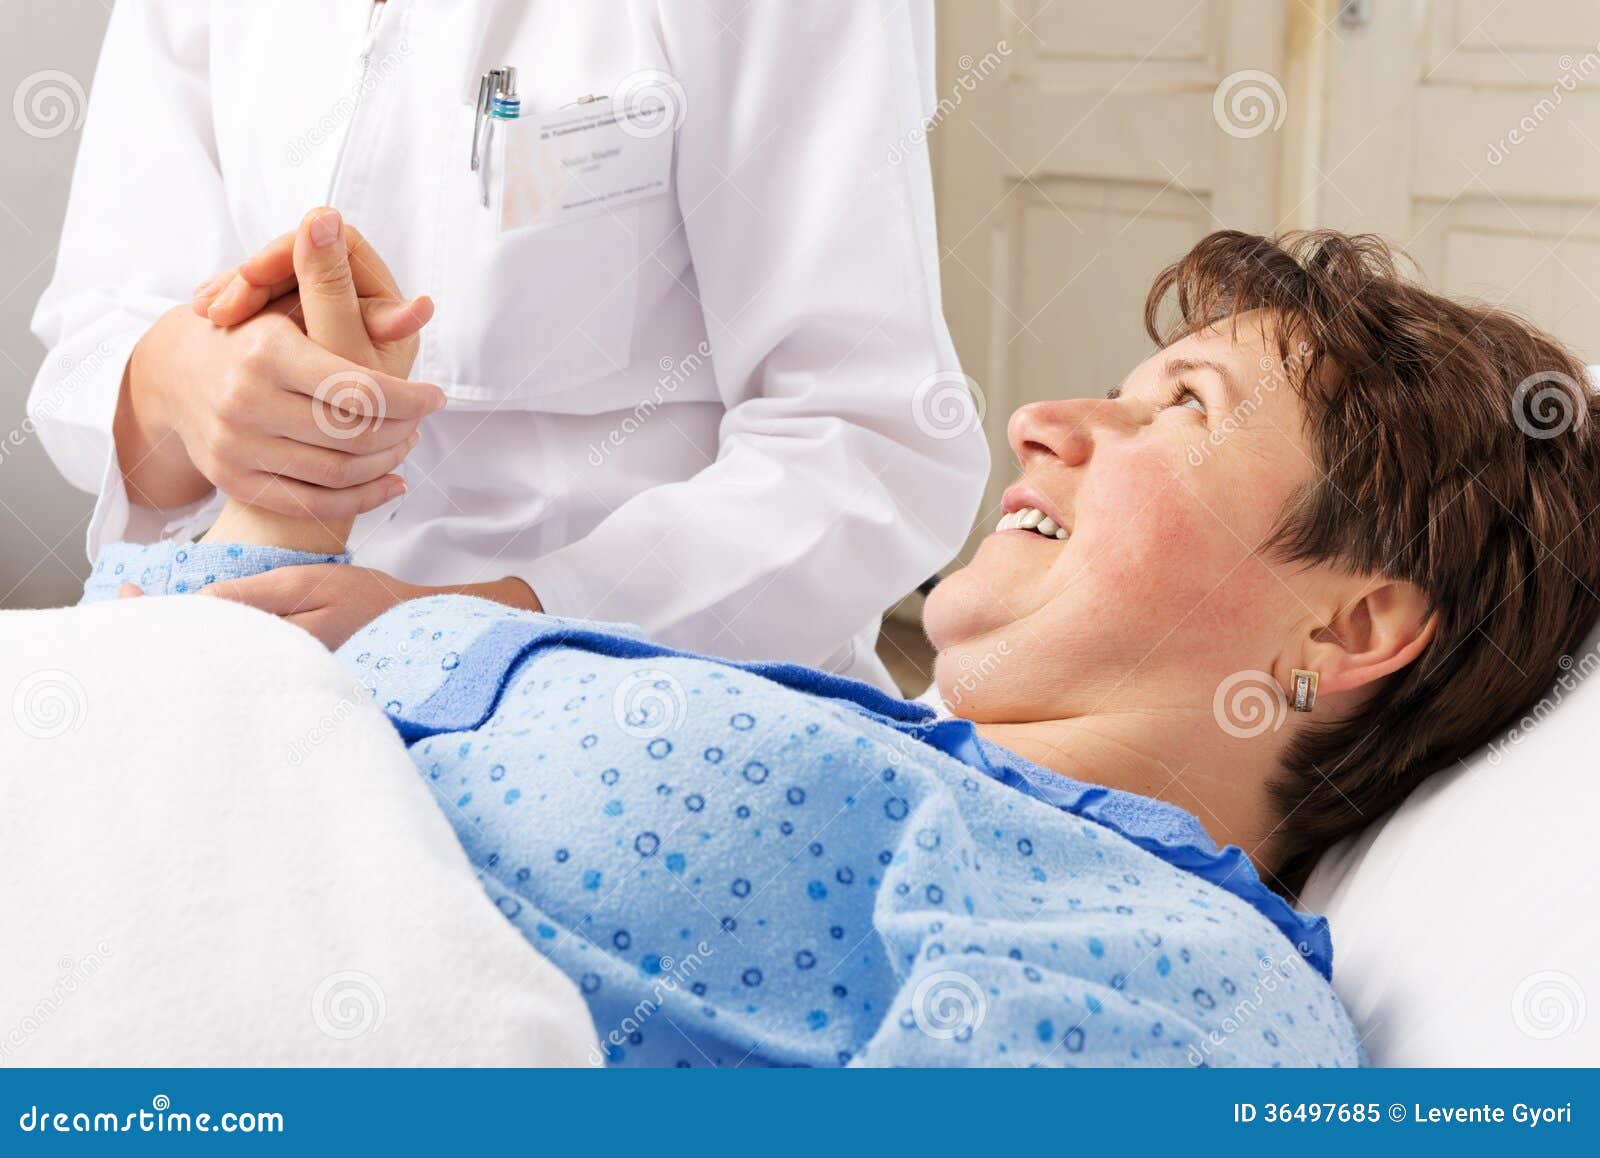 Patient In Hospital Bed Royalty Free Stock Photo - Image: 36497685